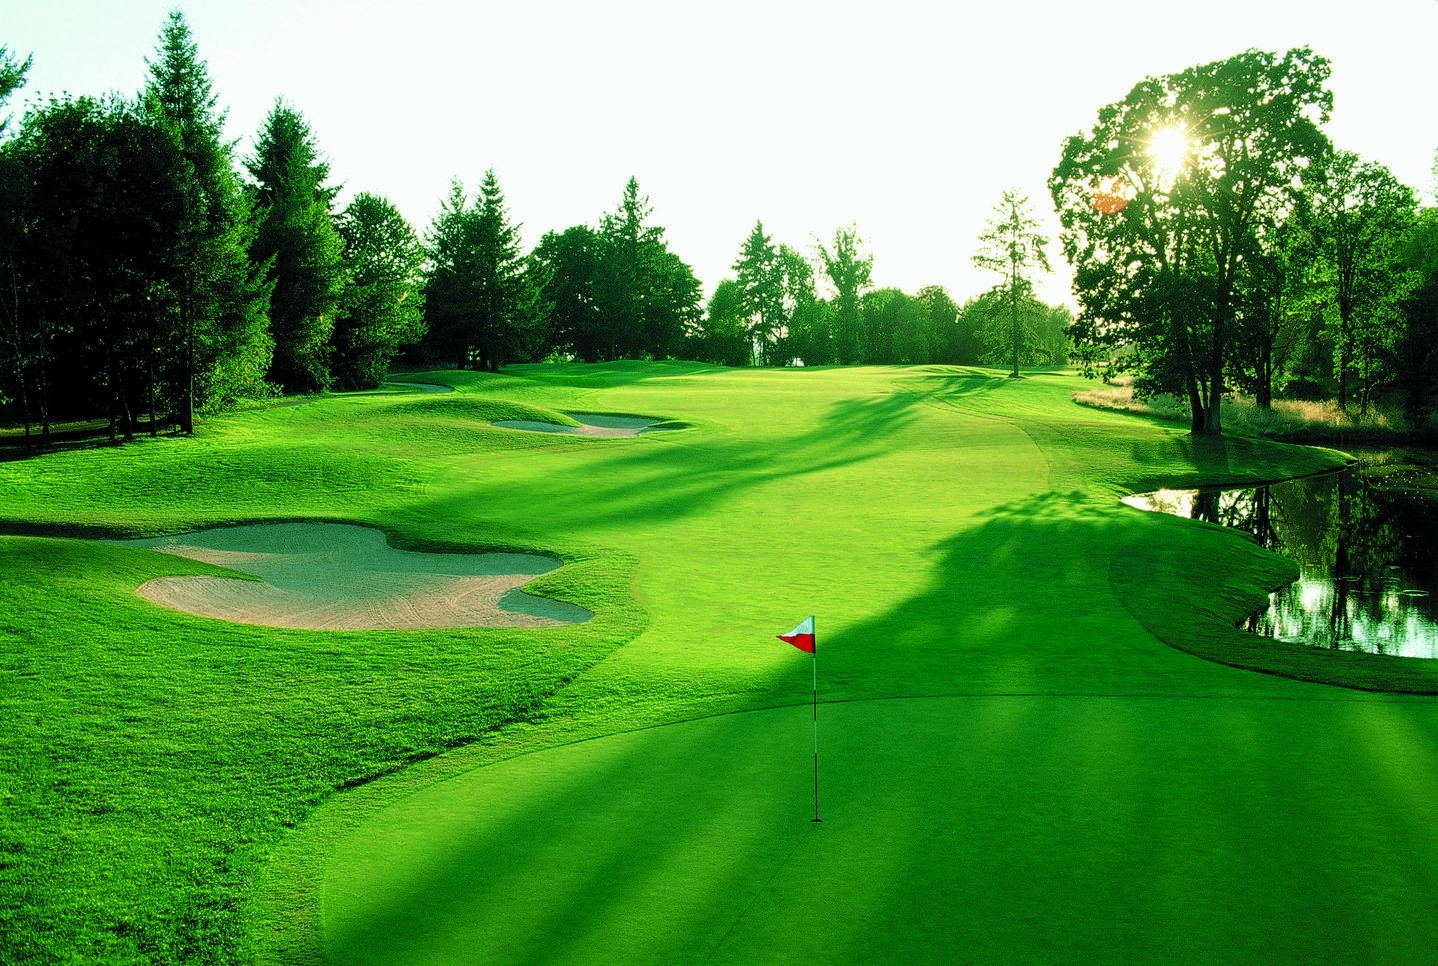 10 New Golf Course Desktop Background FULL HD 1920×1080 For PC Background